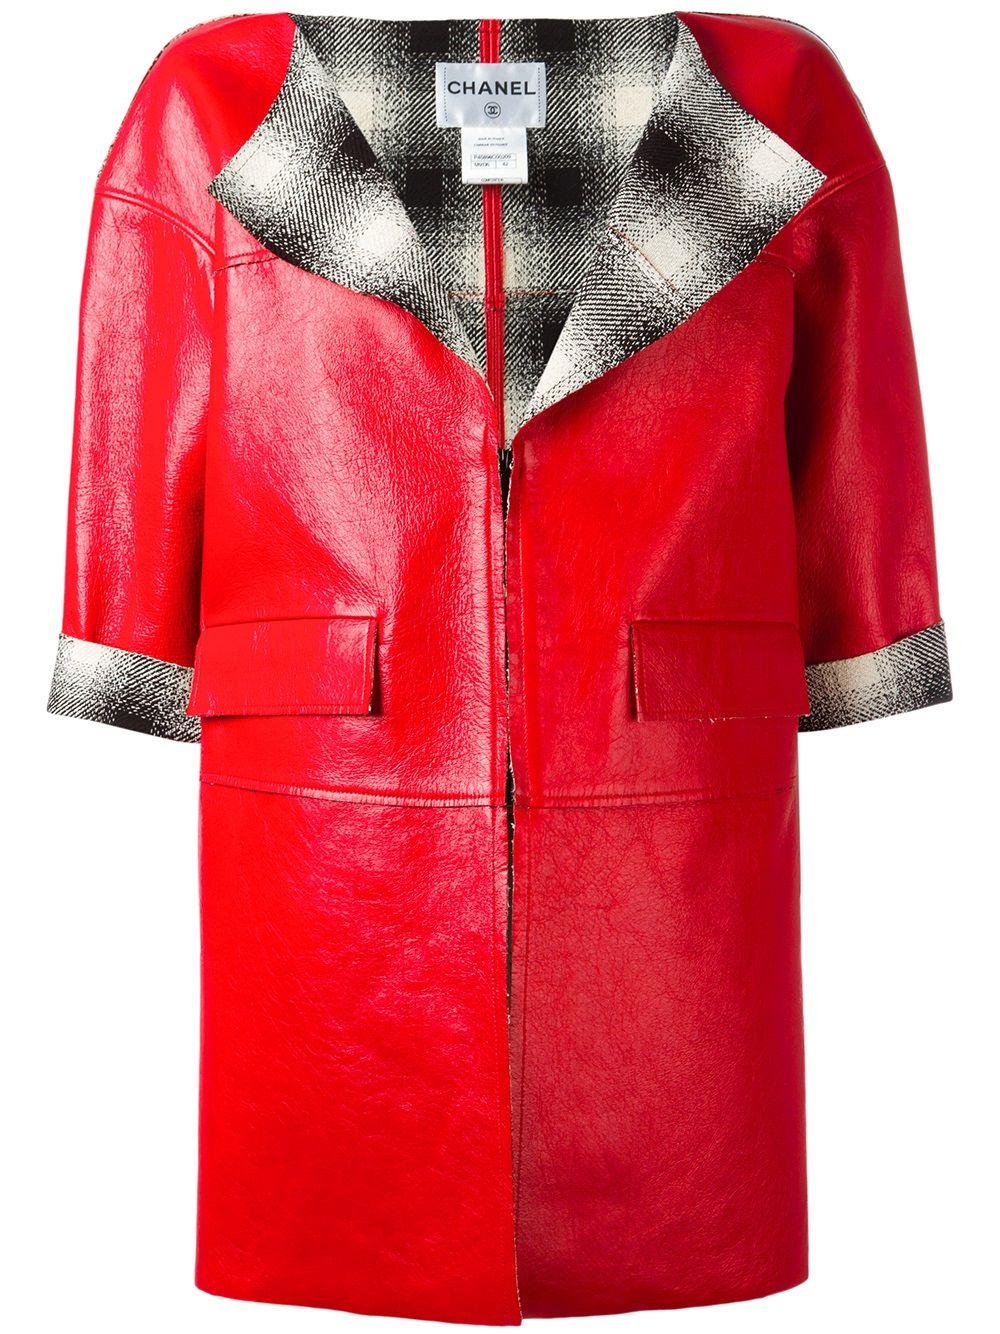 Chanel Red Patent Leather Coat Spring/Summer 2013 In Excellent Condition For Sale In London, GB